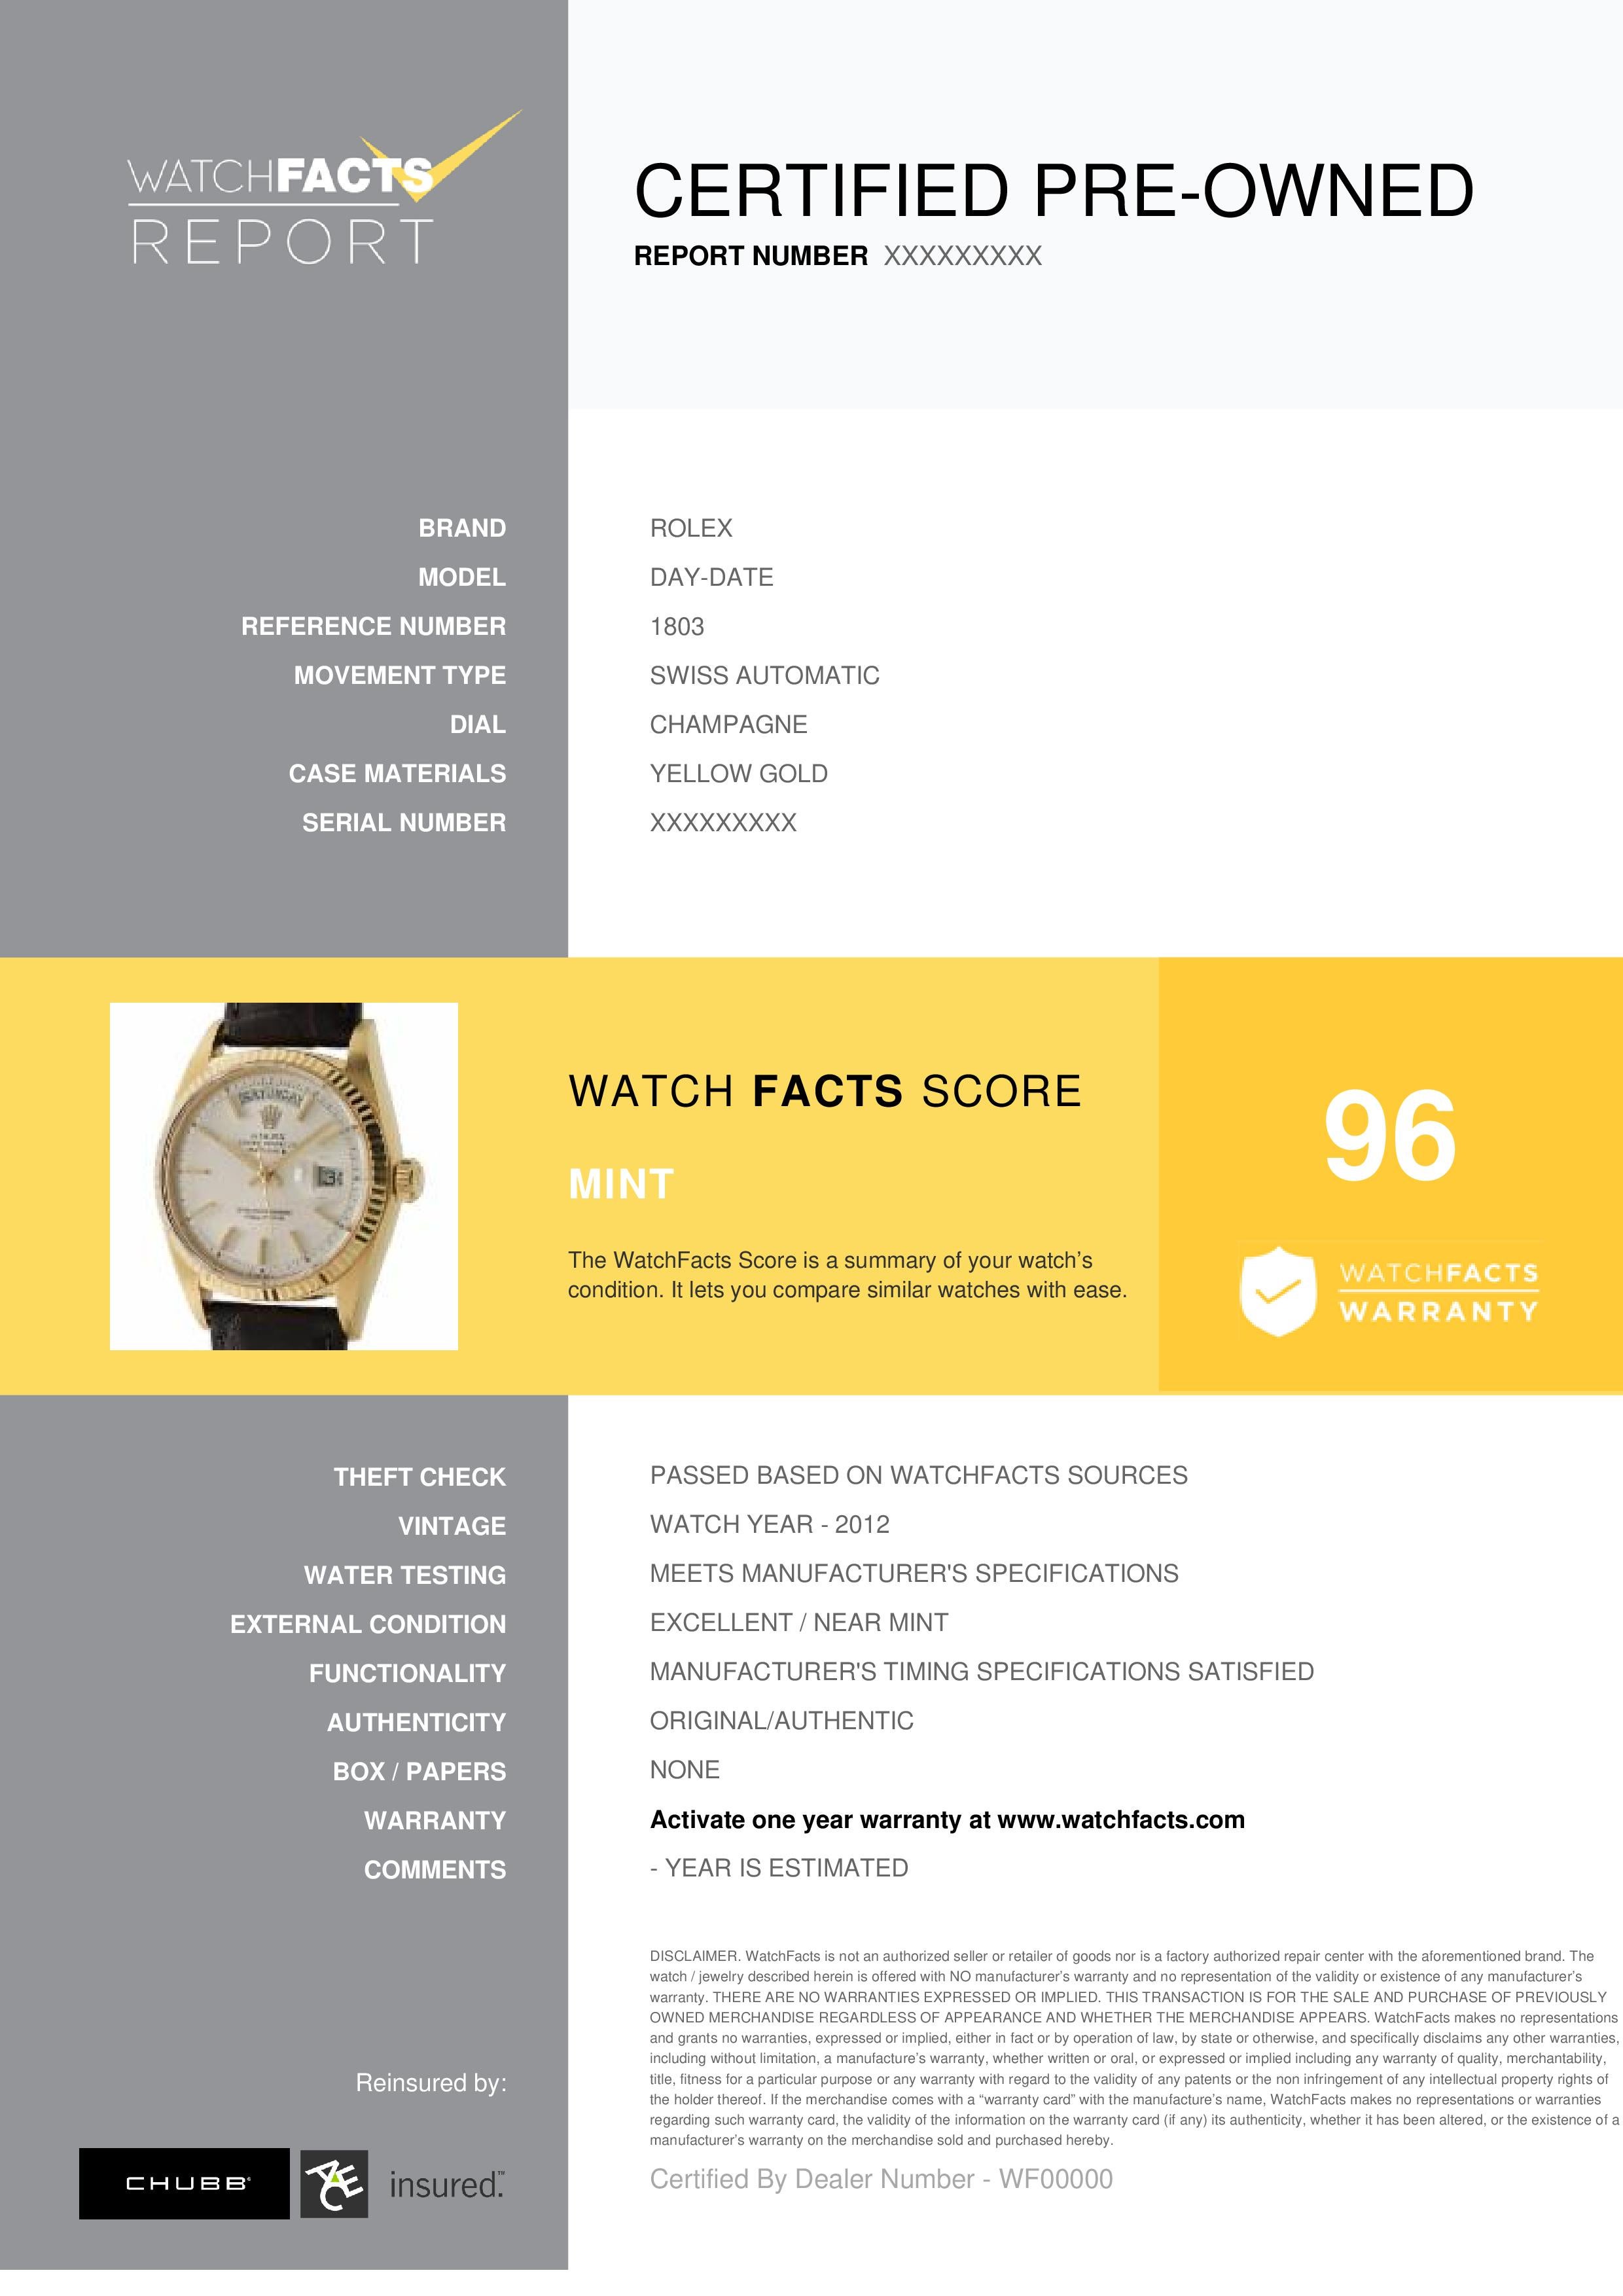 Rolex Day-Date Reference #:1803. ROLEX DAY-DATE PRESIDENT 1803Champagne dial WatchFacts 1 year warranty. Verified and Certified by WatchFacts. 1 year warranty offered by WatchFacts.
